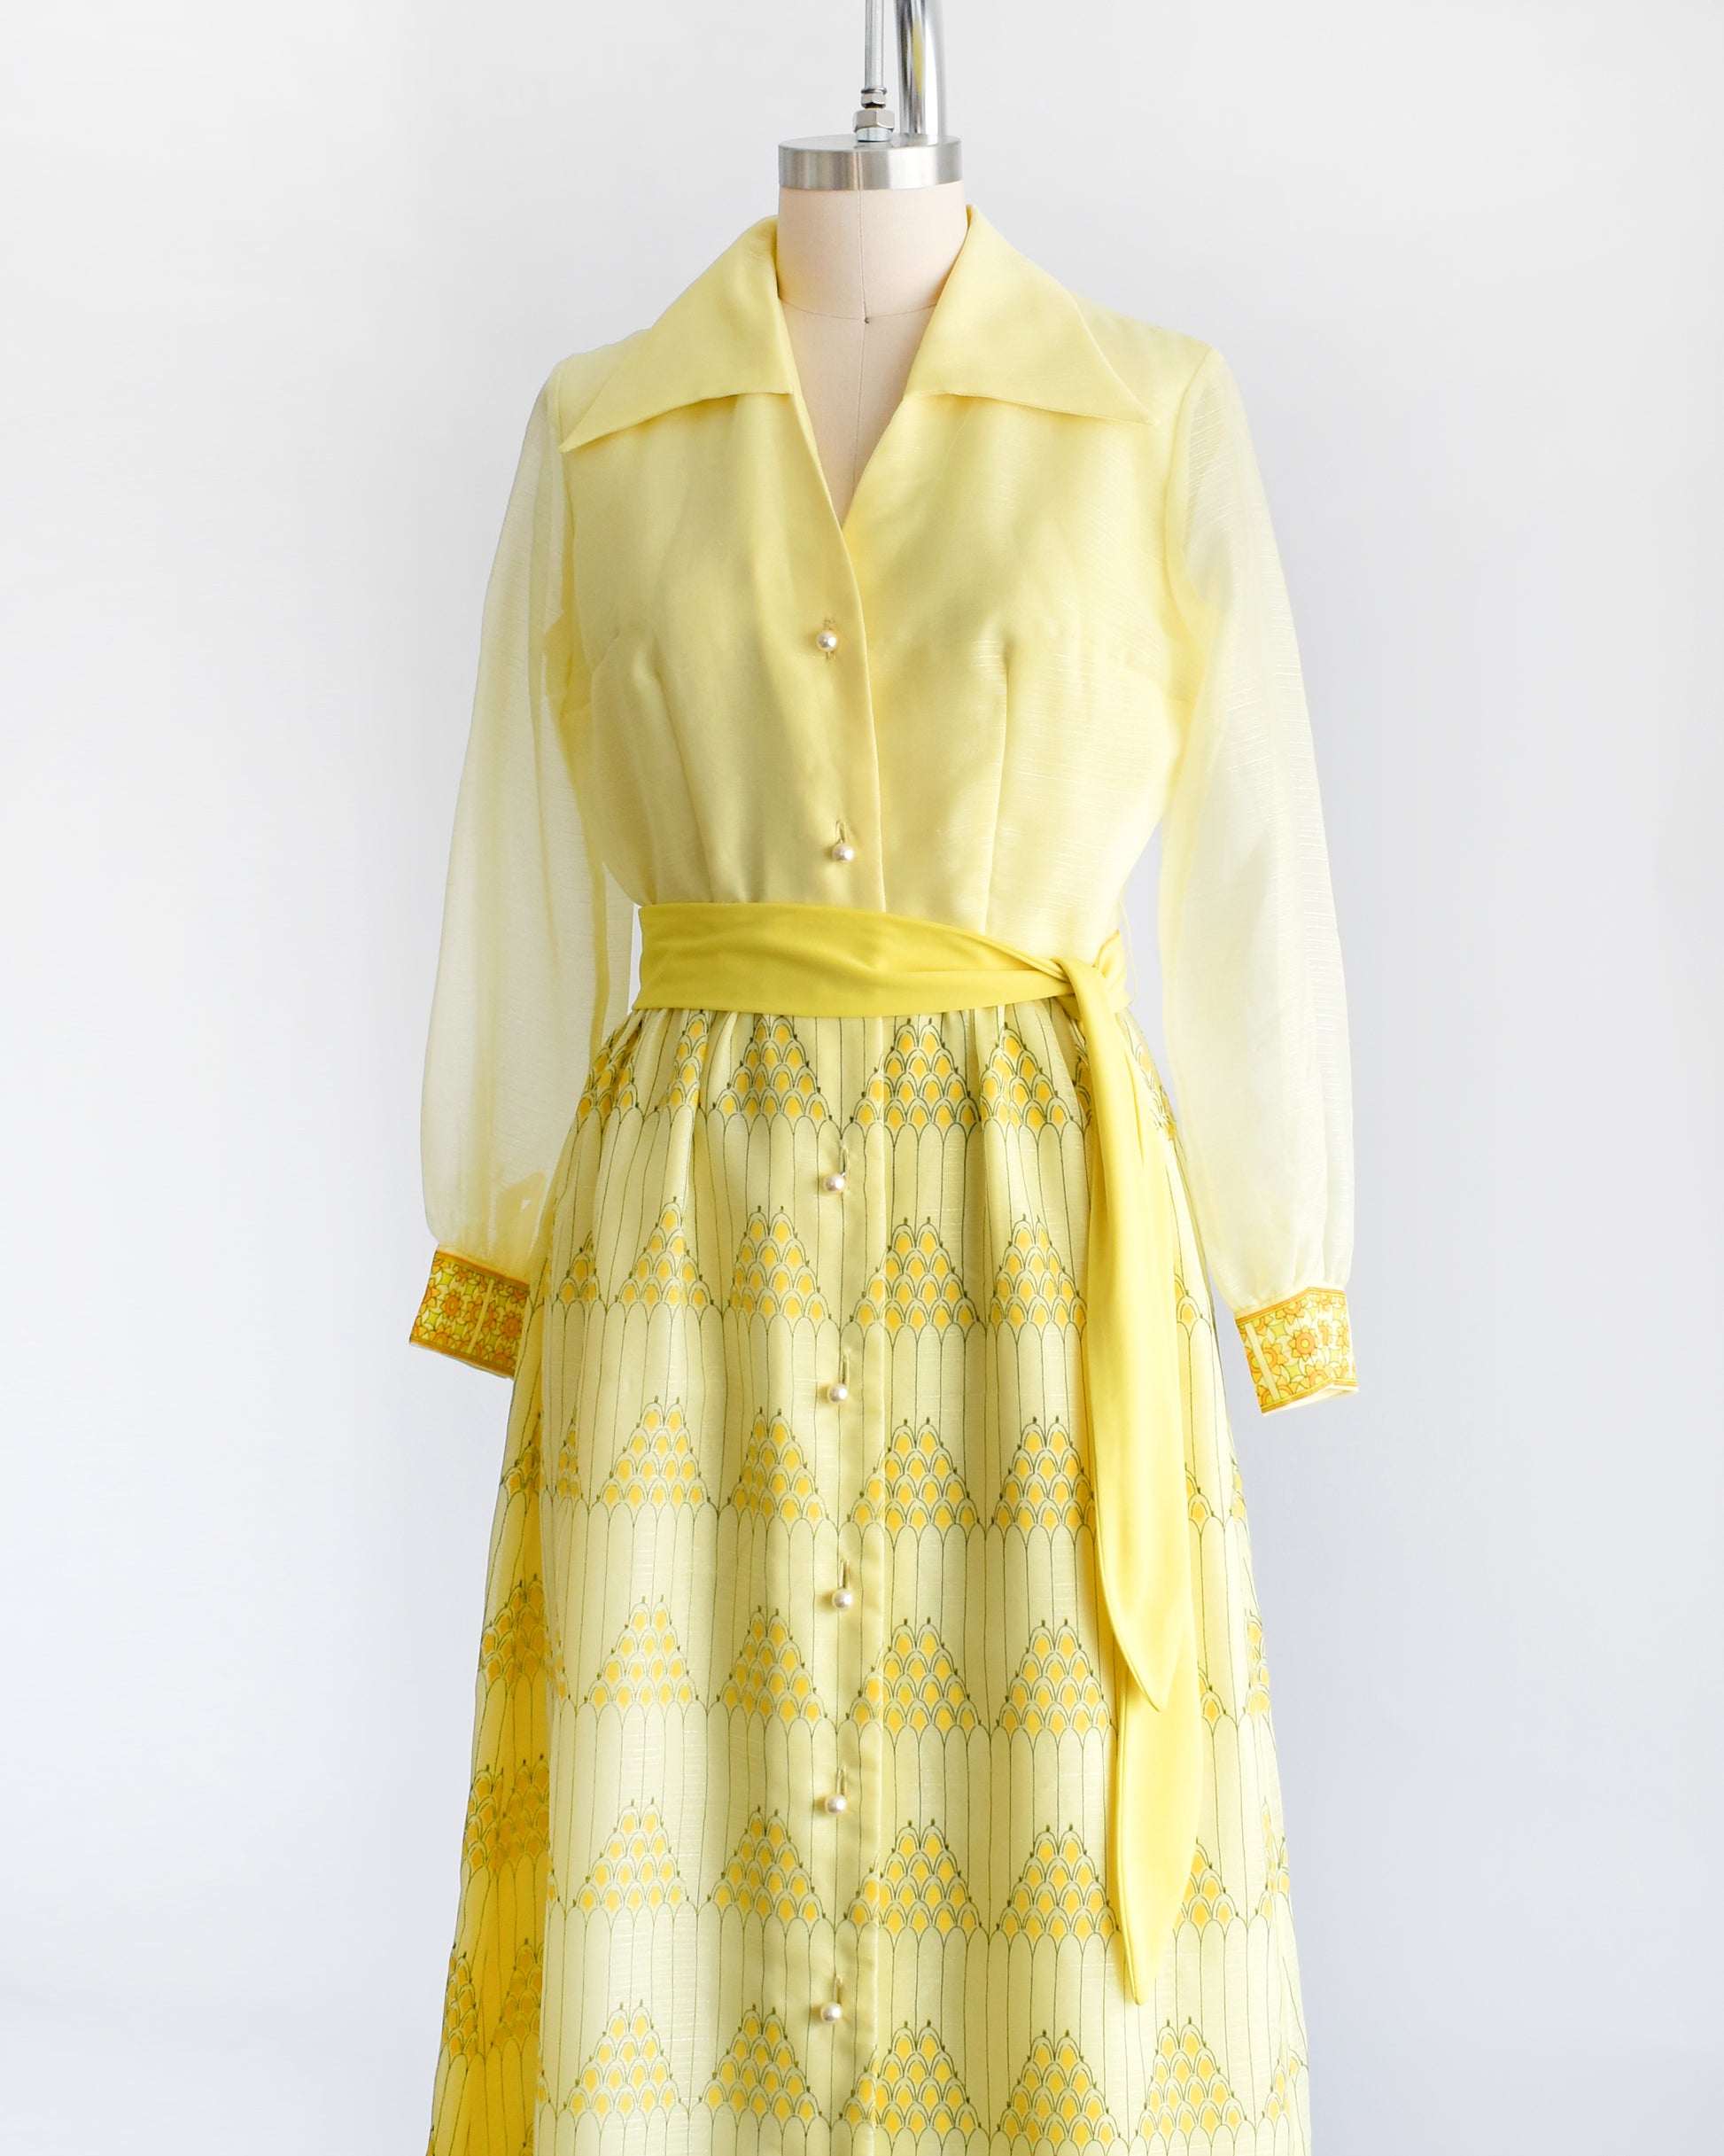 Side front view of a yellow vintage maxi dress on a dress form. The dress features a collared neckline, semi sheer long sleeves, button down front, yellow sash belt, and a maxi skirt that has a pyramid and floral print.